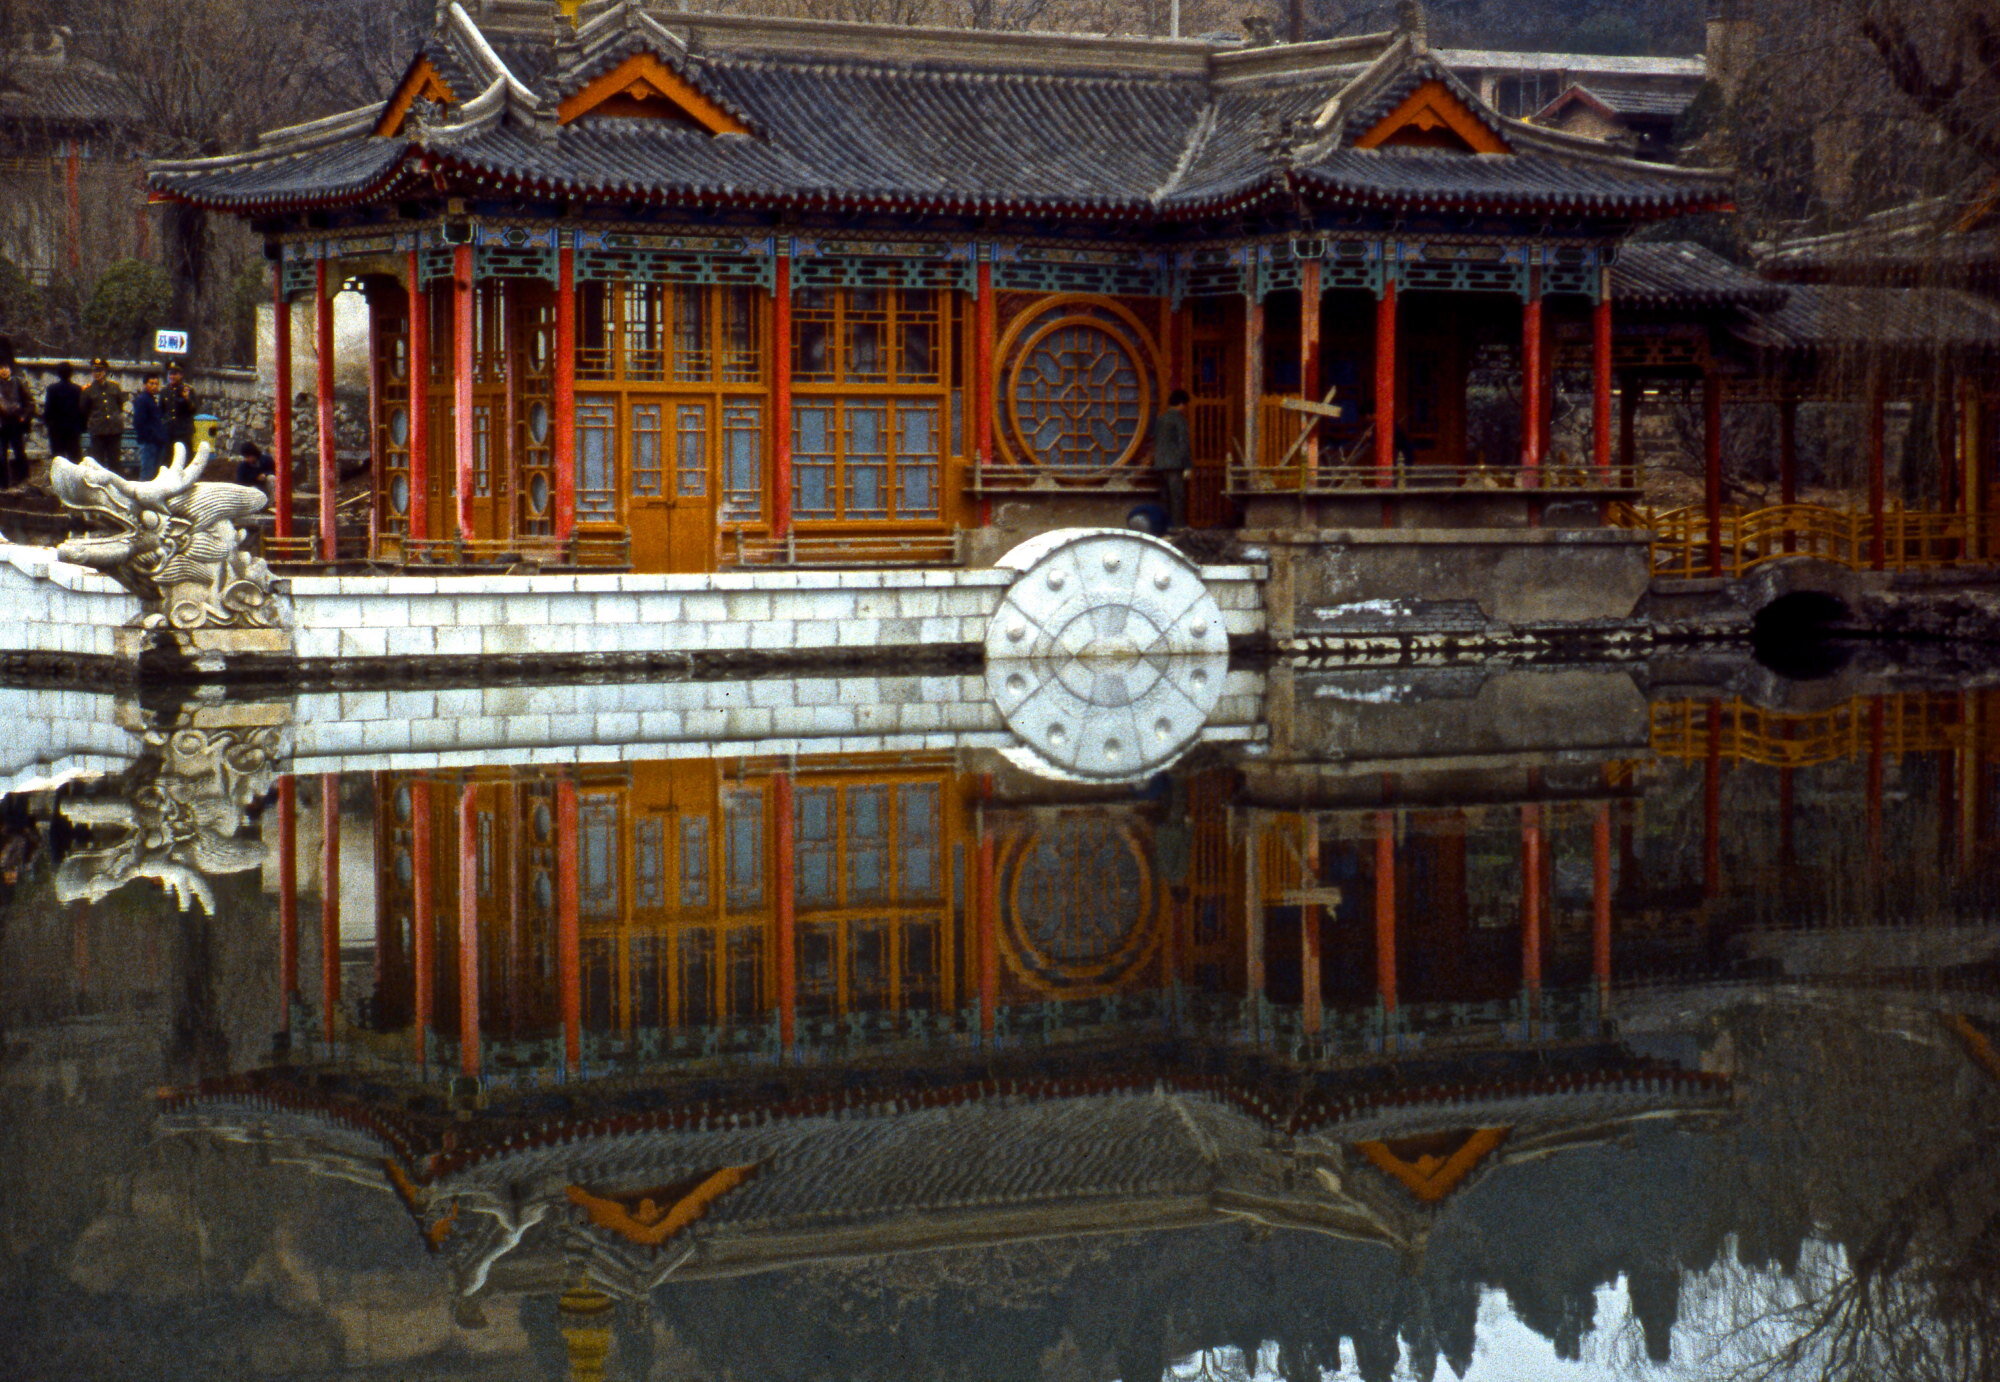 Chinese pavilion in a reflective mood.